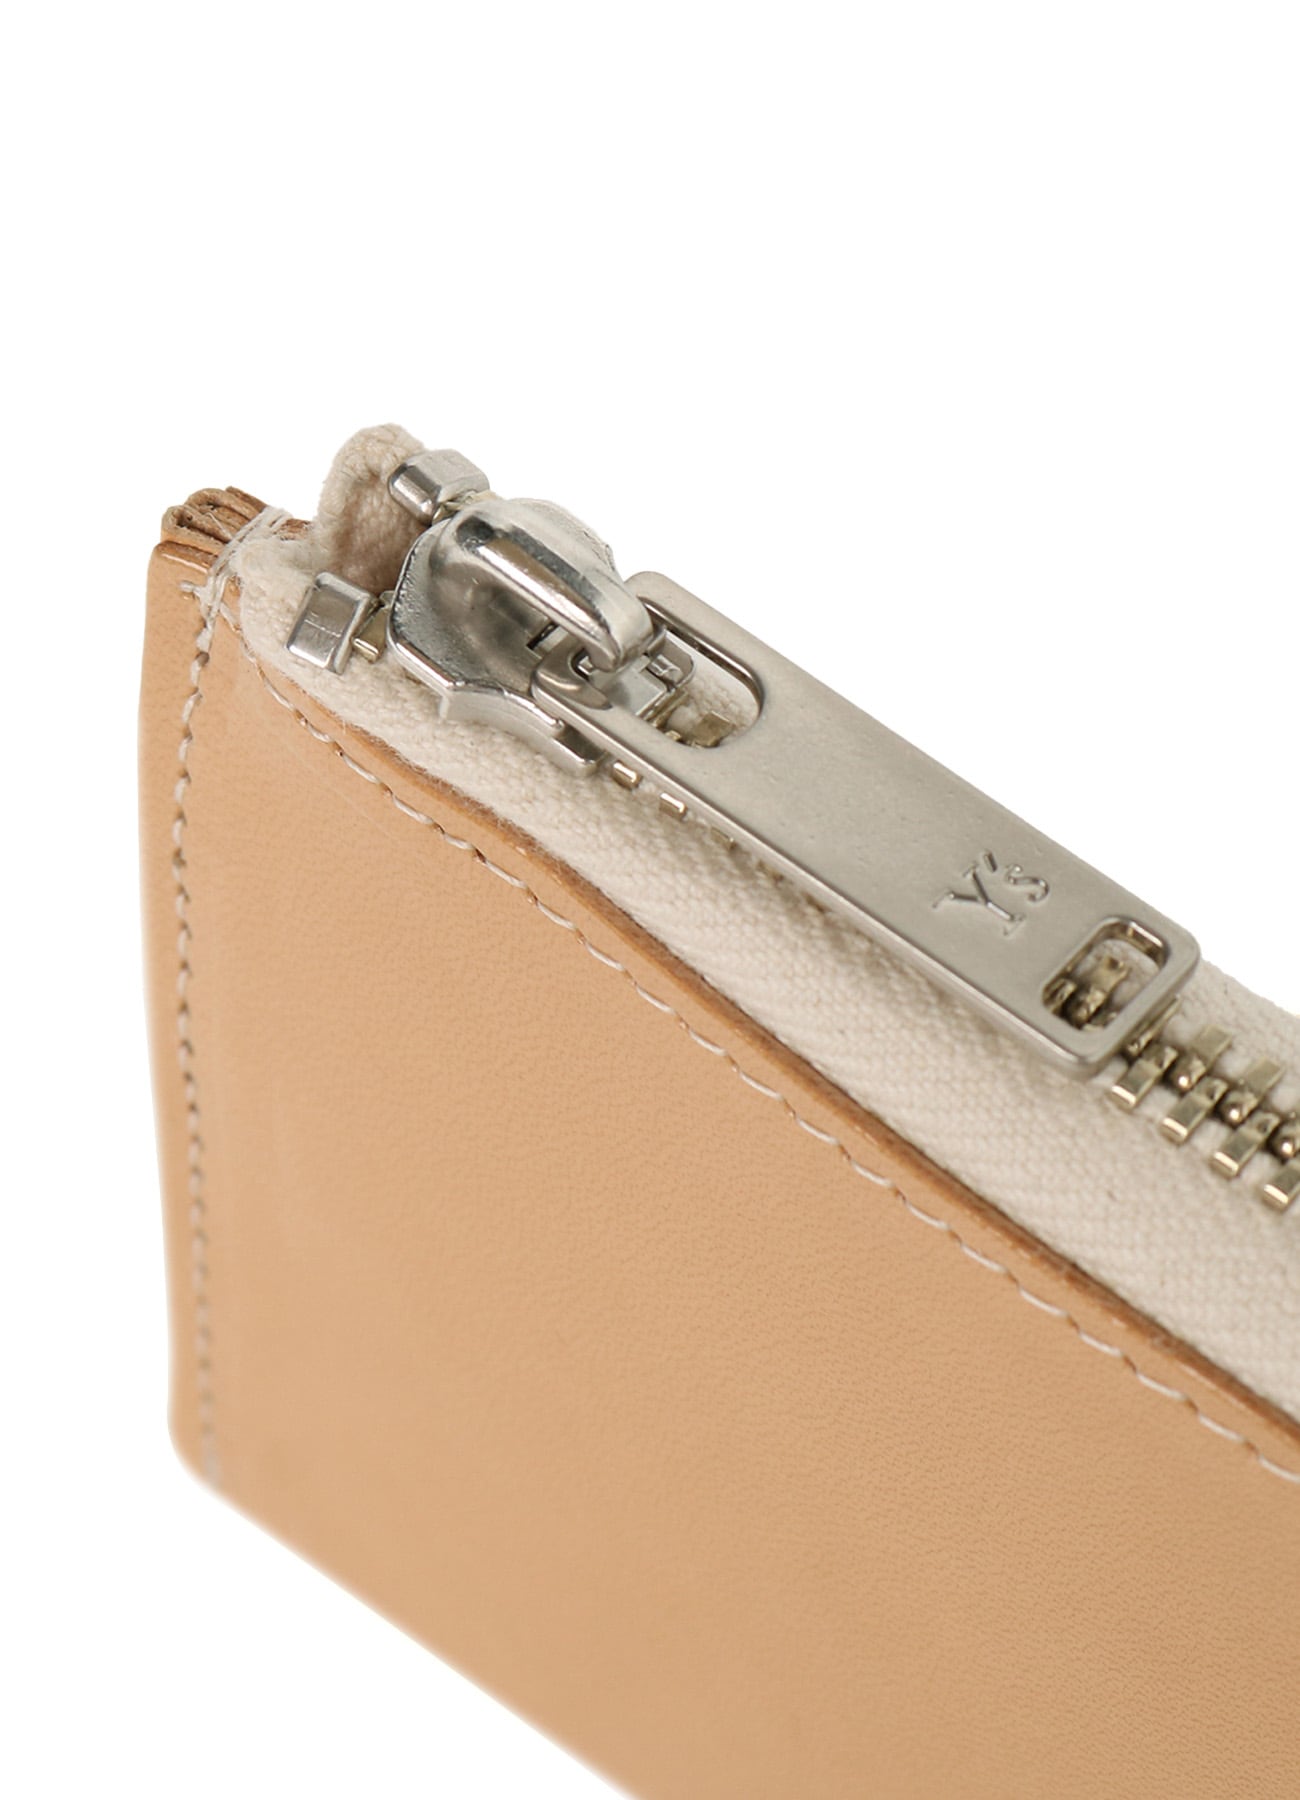 TANNED/ENAMEL-COATED LEATHER ZIPPERED CARD CASE(S Beige): Vintage